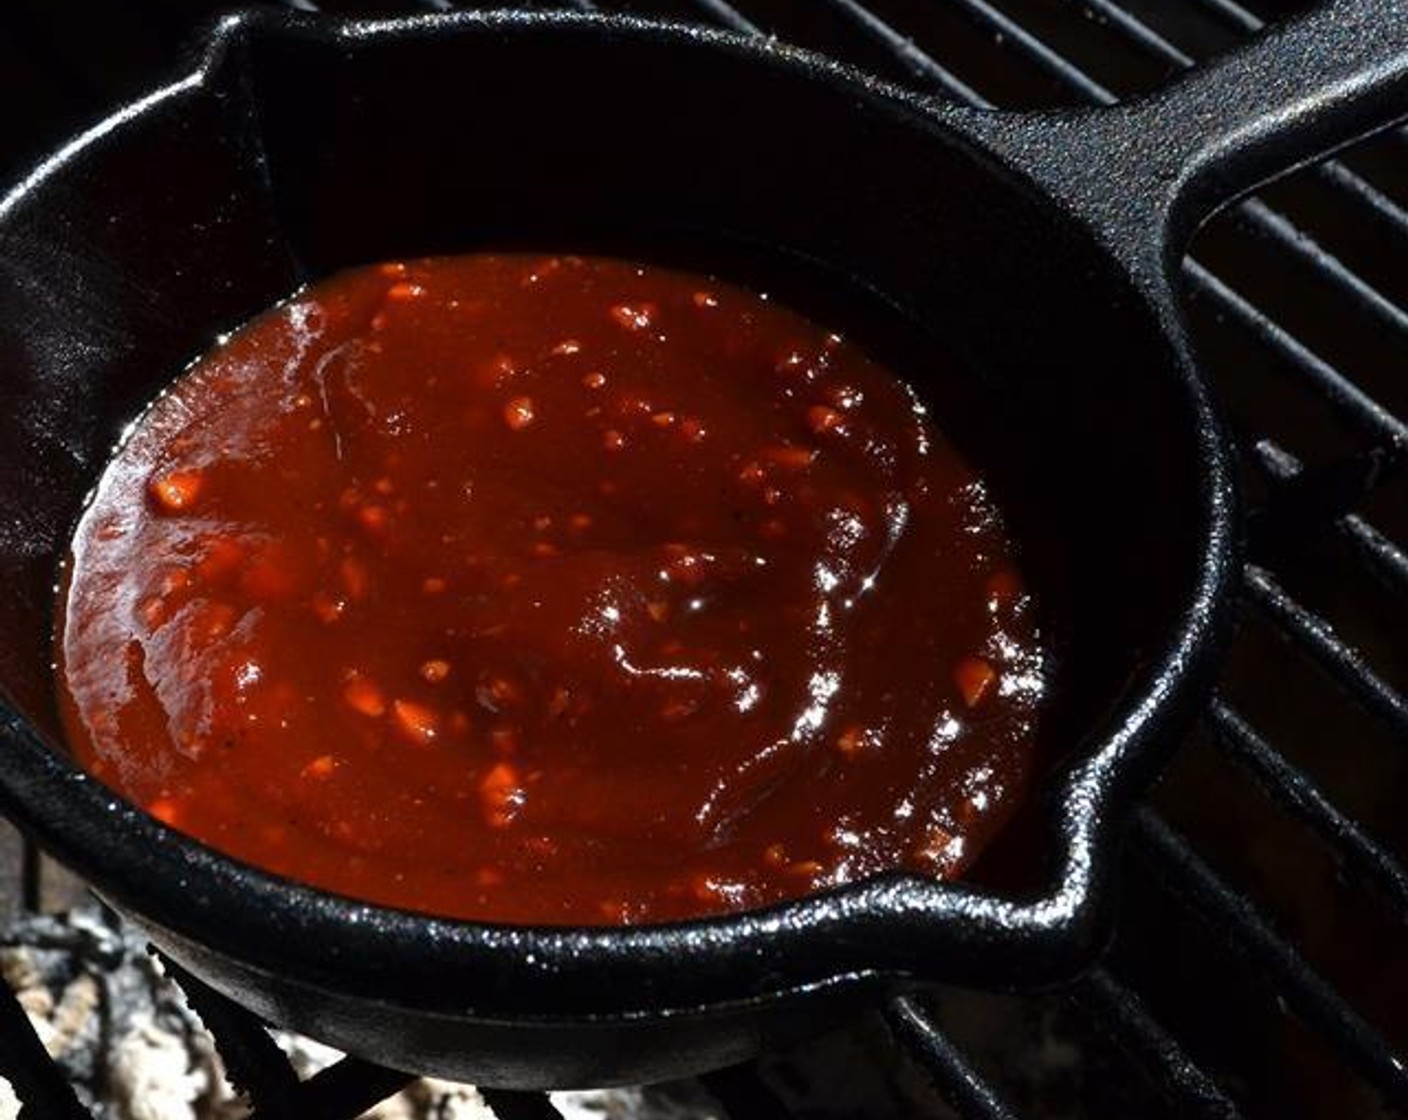 Bucket of Red Barbecue Sauce